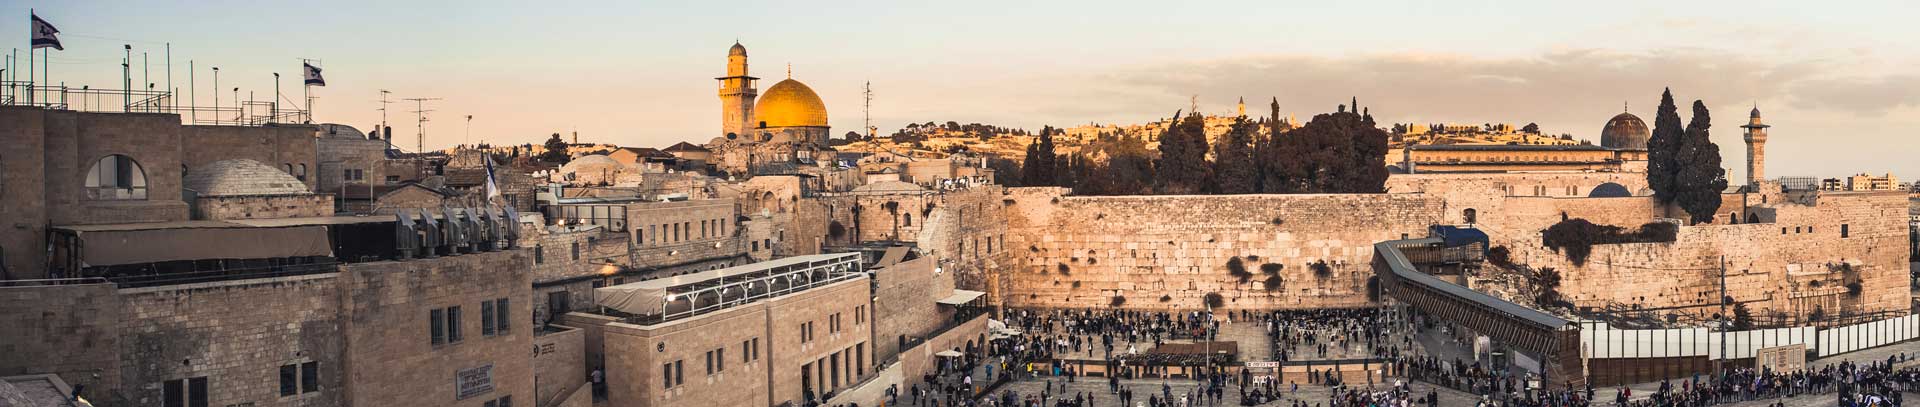 Pilgrim Group Tours to Israel - The Western Wall